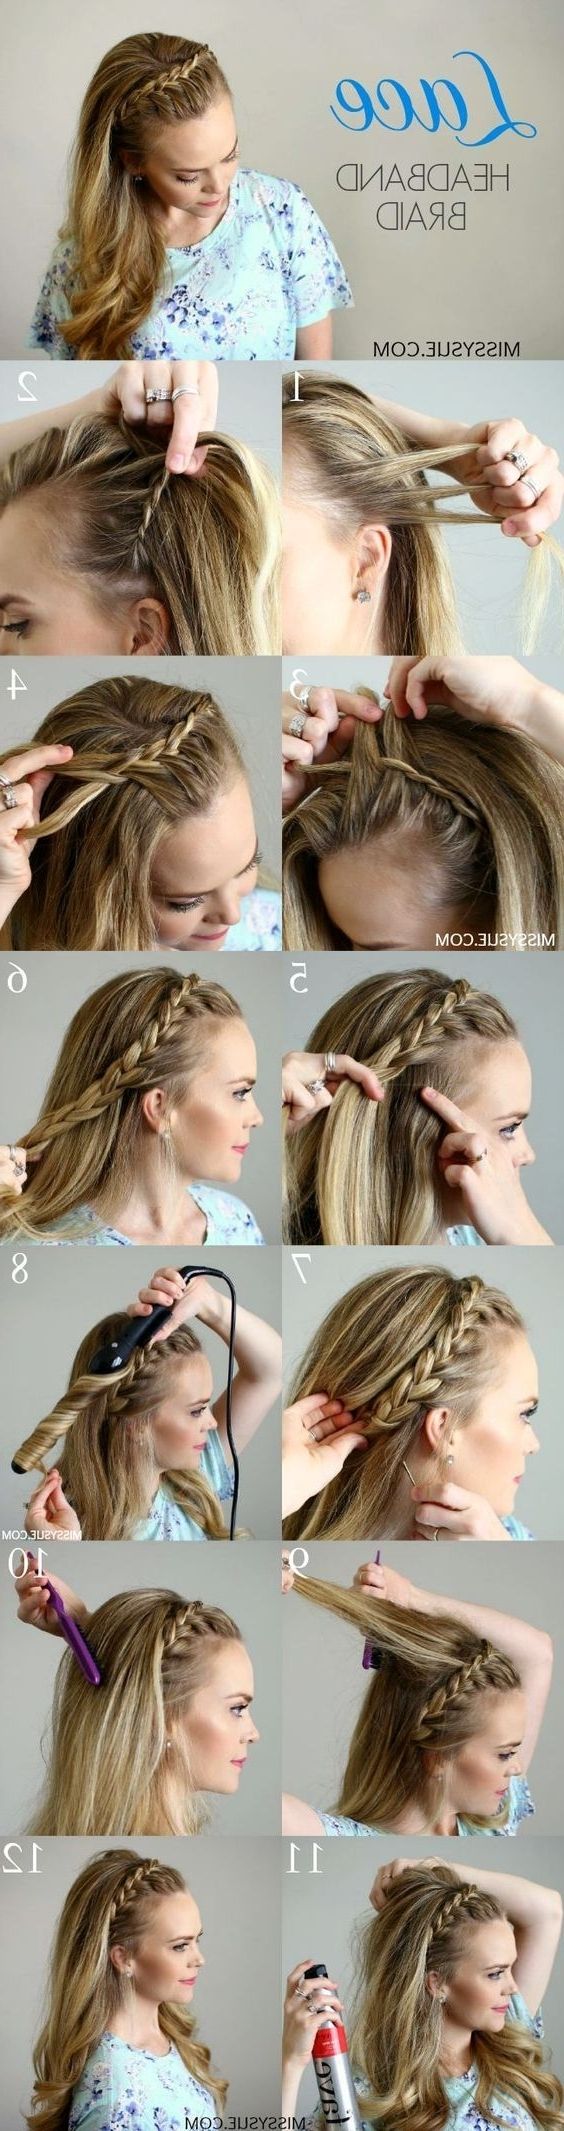 Cute Hairstyles, Hairstyle Ideas (View 5 of 20)